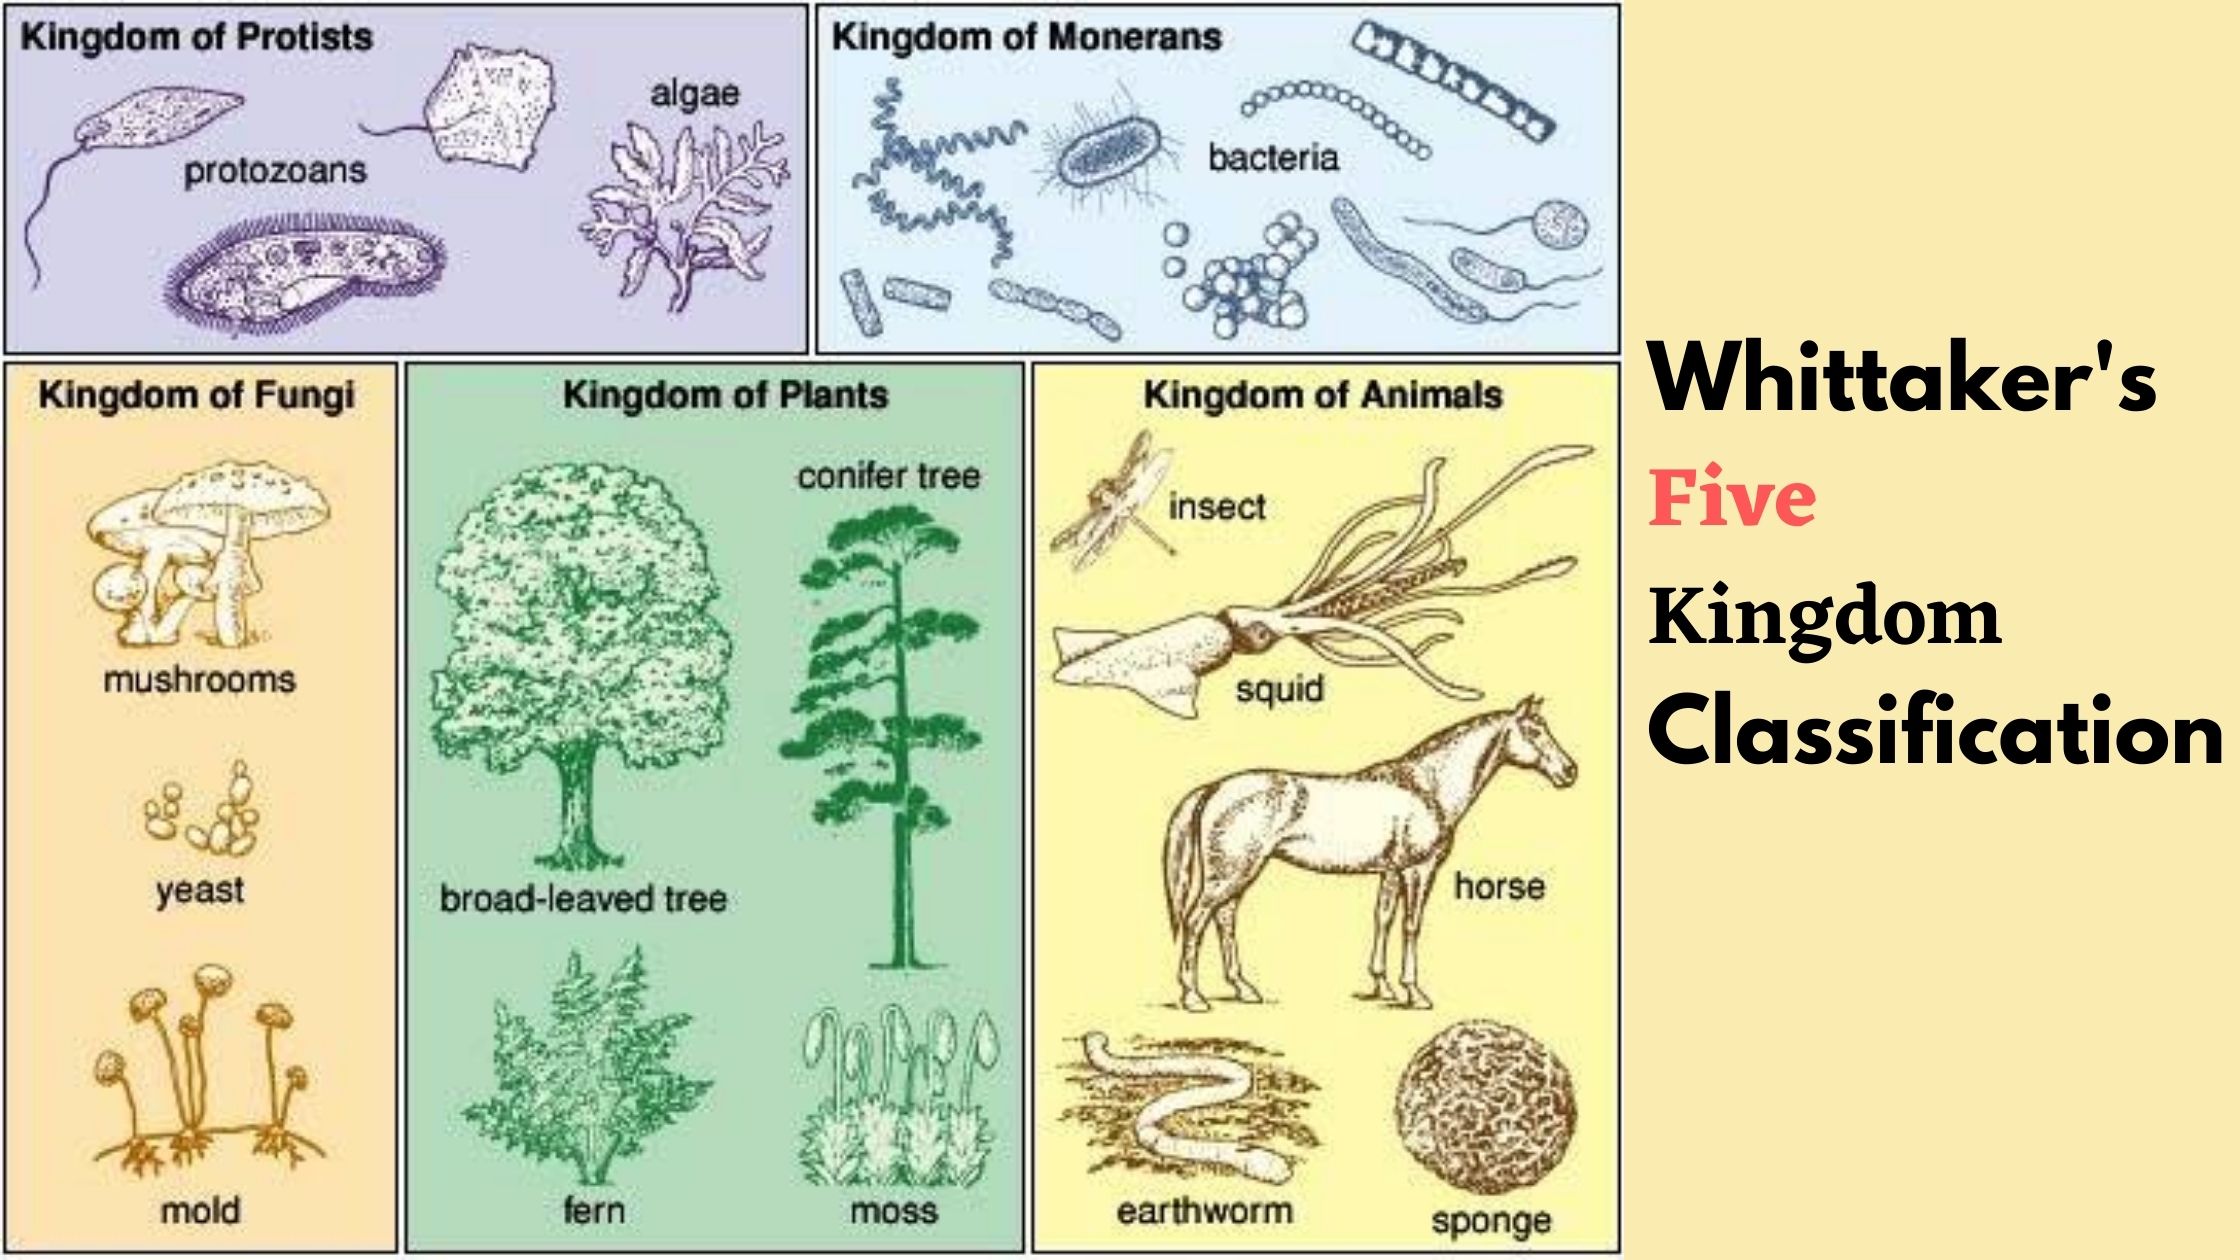 Whittaker's Five Kingdom Classification - Advantages And Limitations